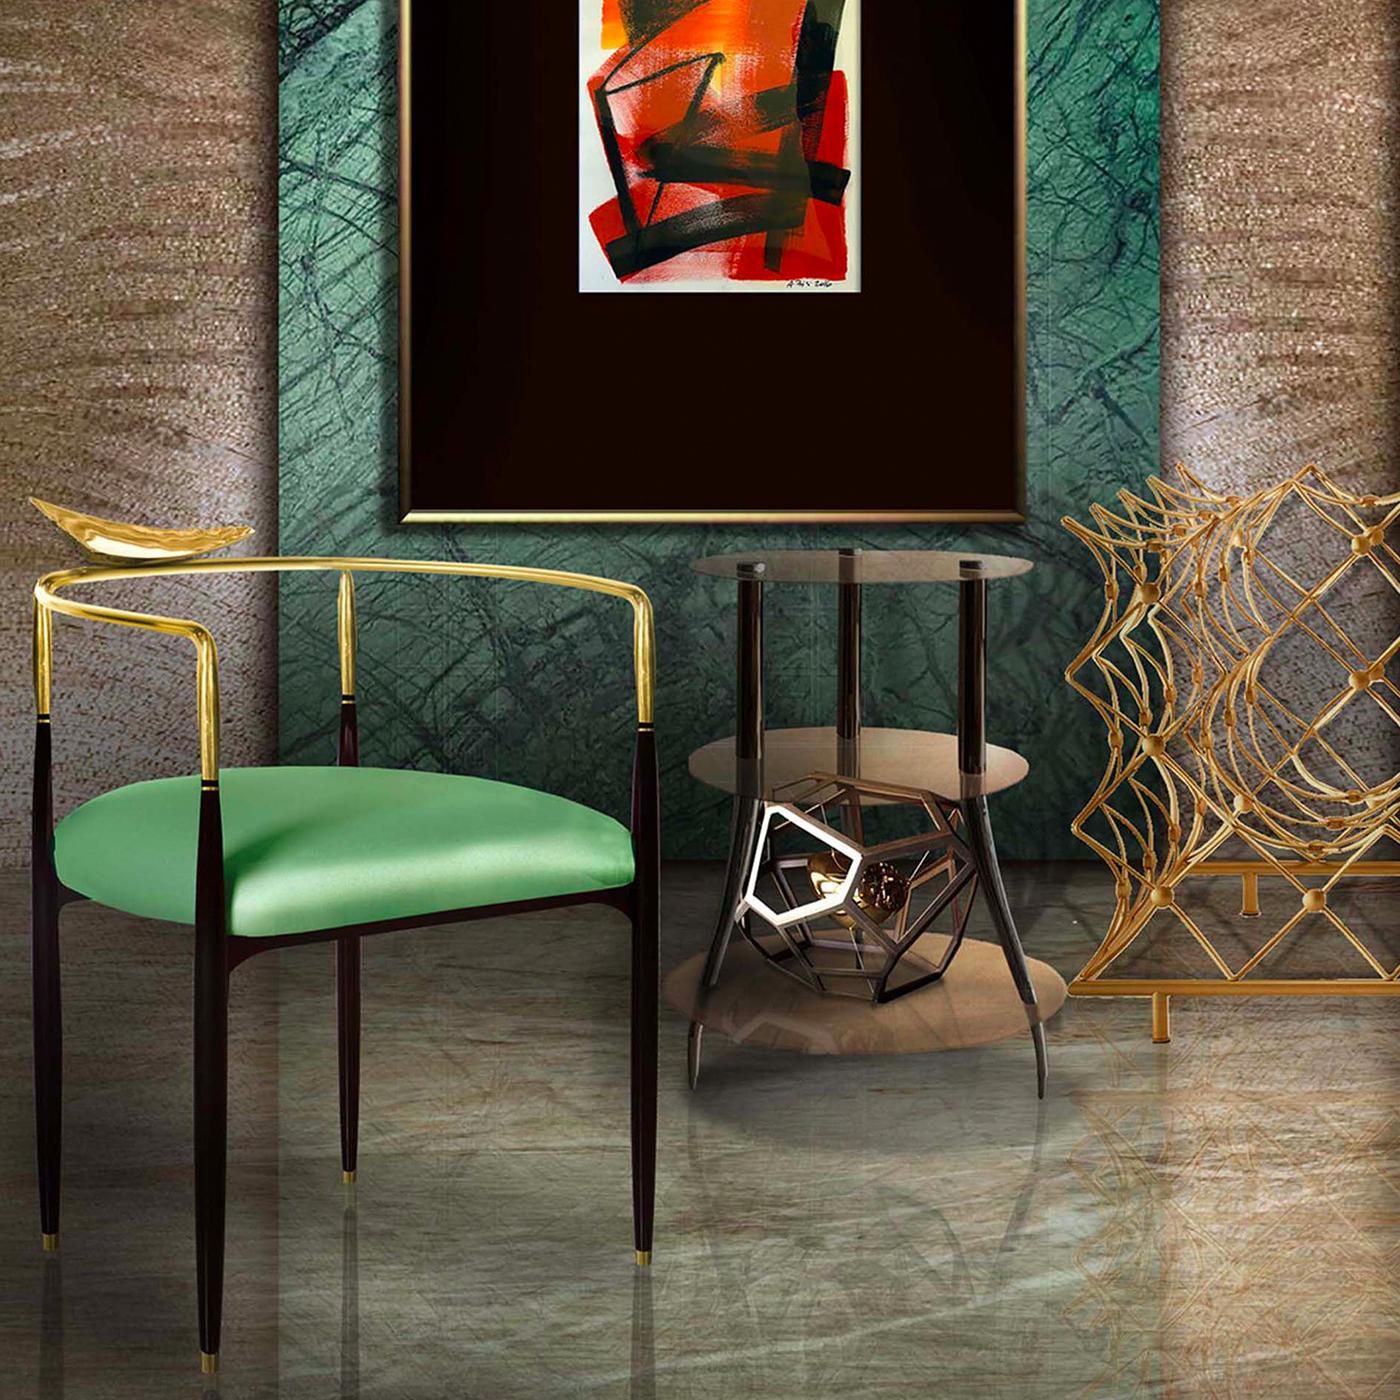 Part of the Dune collection of chairs designed by Livio Ballabio, this stunning object of functional decor boasts character and elegance and will make a statement around a modern dining table in an eclectic living room. Its structure in wenge